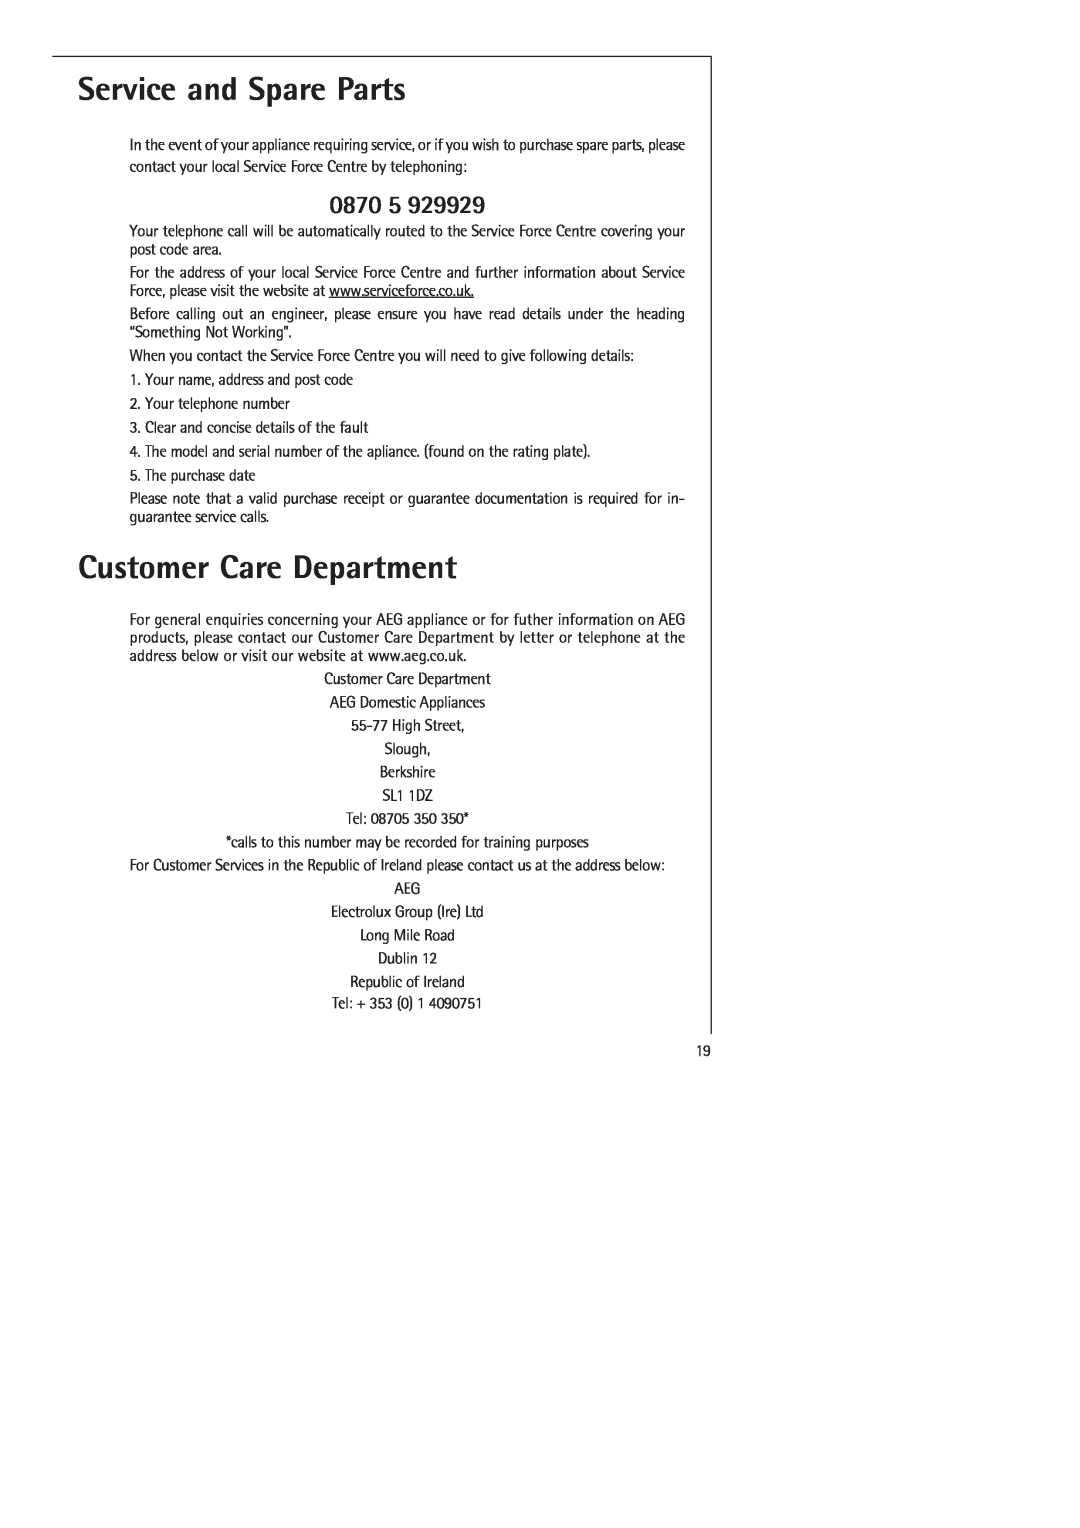 Electrolux SANTO 70398-DT manual Service and Spare Parts, Customer Care Department, 0870 5 